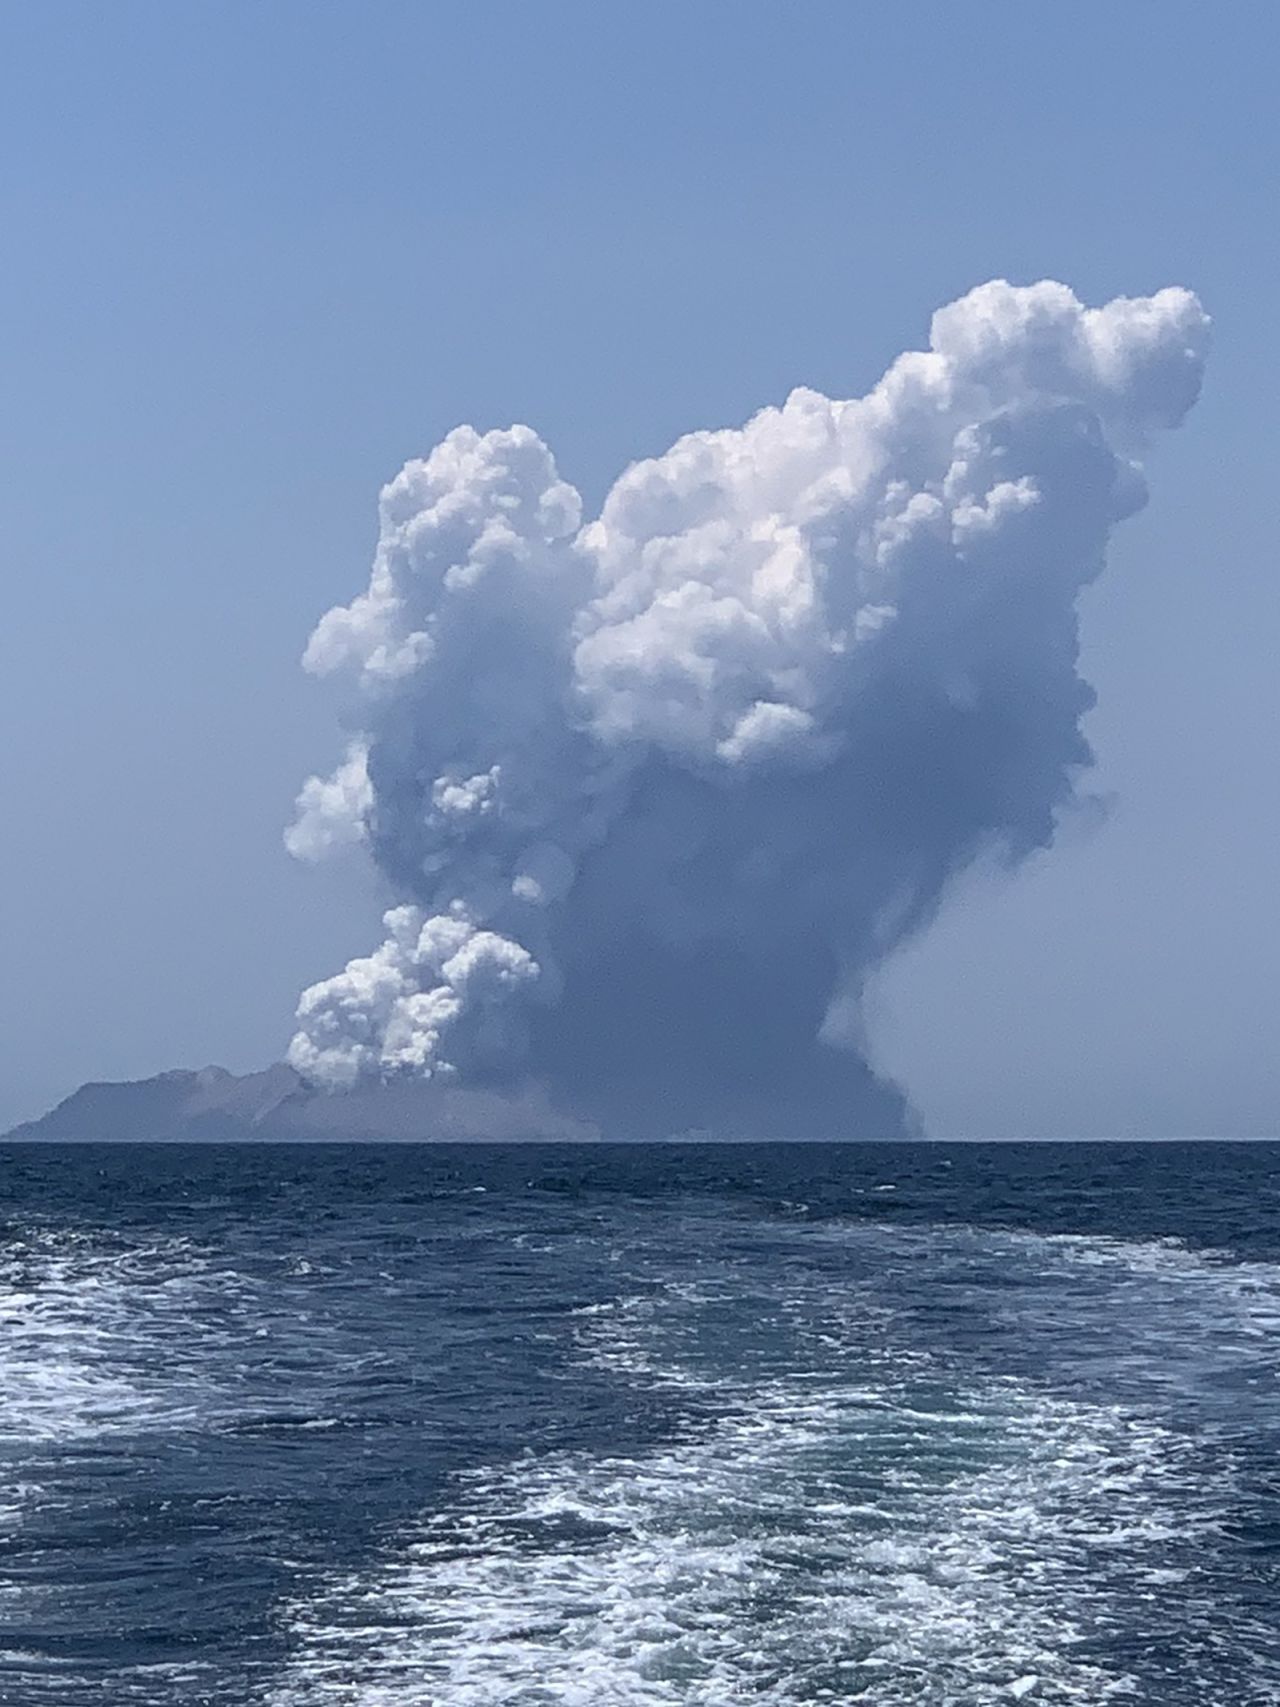 Jon Arrieta, who captured this photo of the ash cloud, told CNN he left White Island just one hour before the eruption.